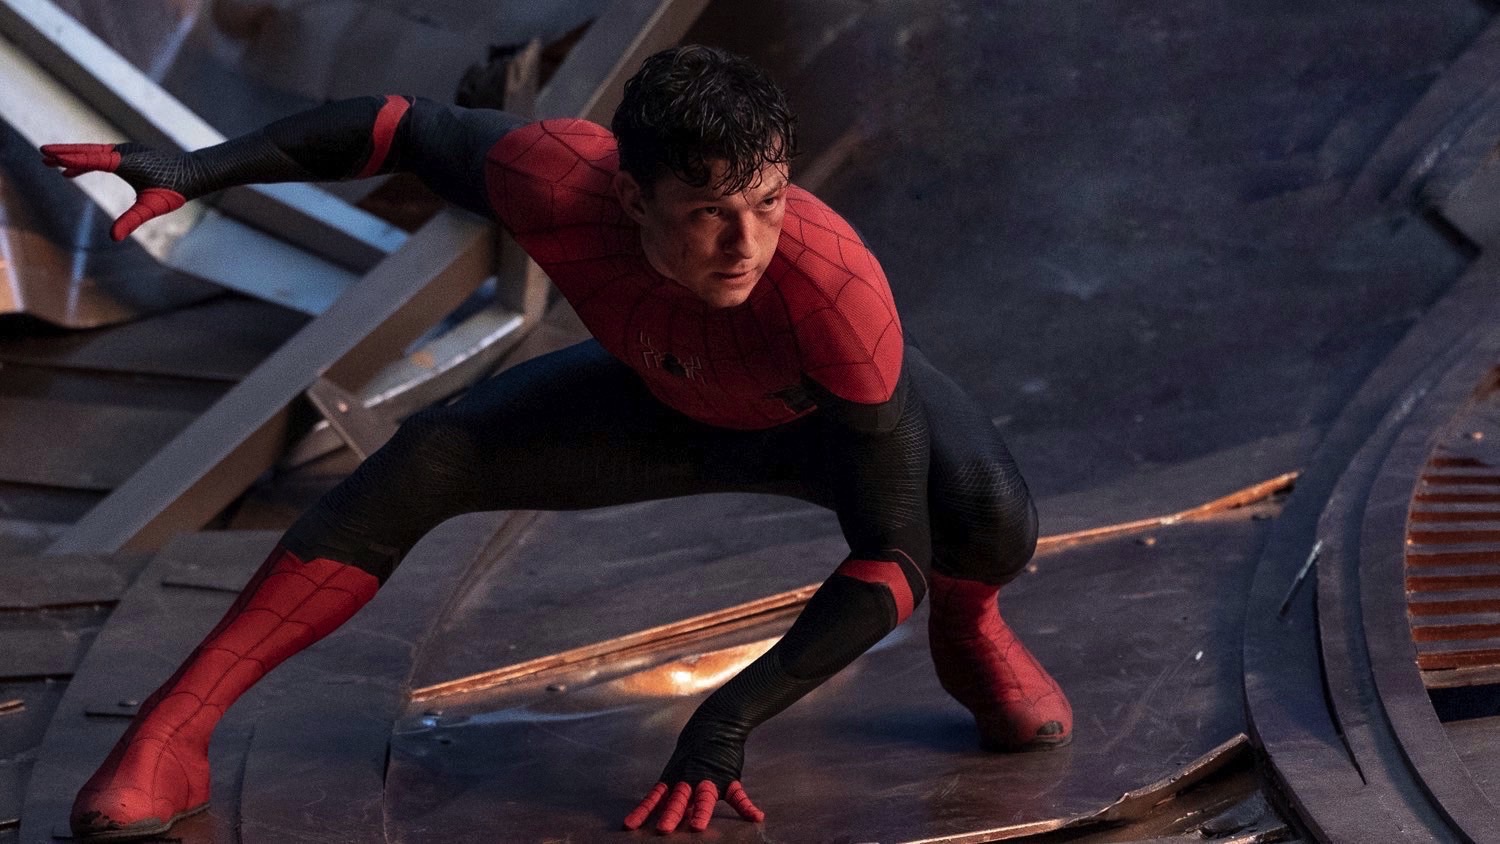 Take a look at what Tom Holland’s Spider-Man might look in the Venom suit